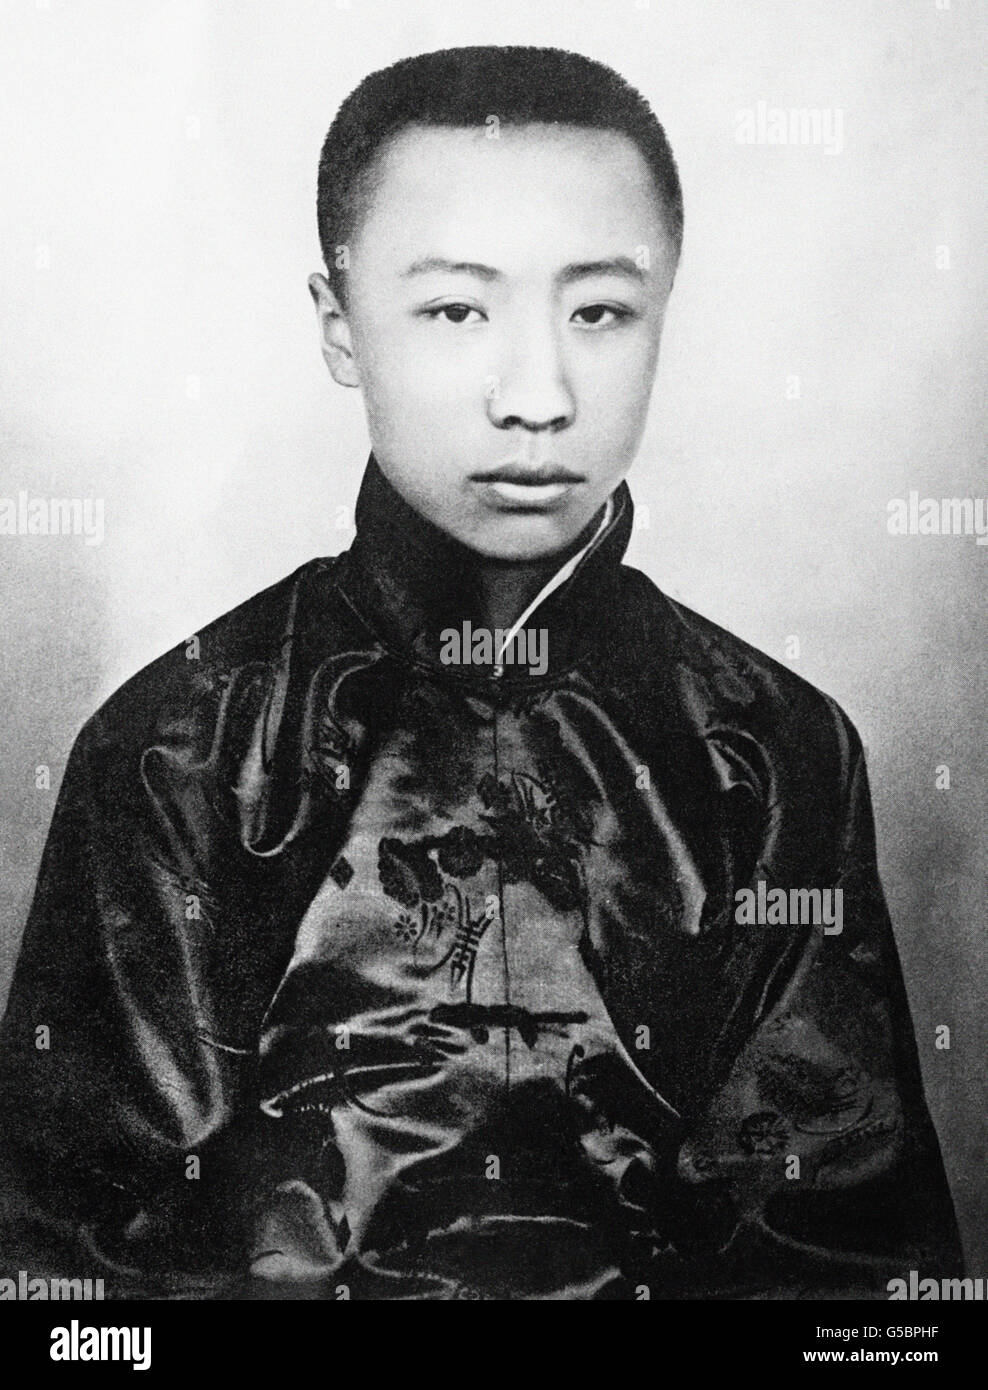 Aisin-Gioro Puyi, the former Xuantong Emperor of China, who abdicated in 1912 and still lives in Peking under the name of Henry Puyi, and is often referred to as "The Last Emperor" seen here on his 17th birthday. Stock Photo